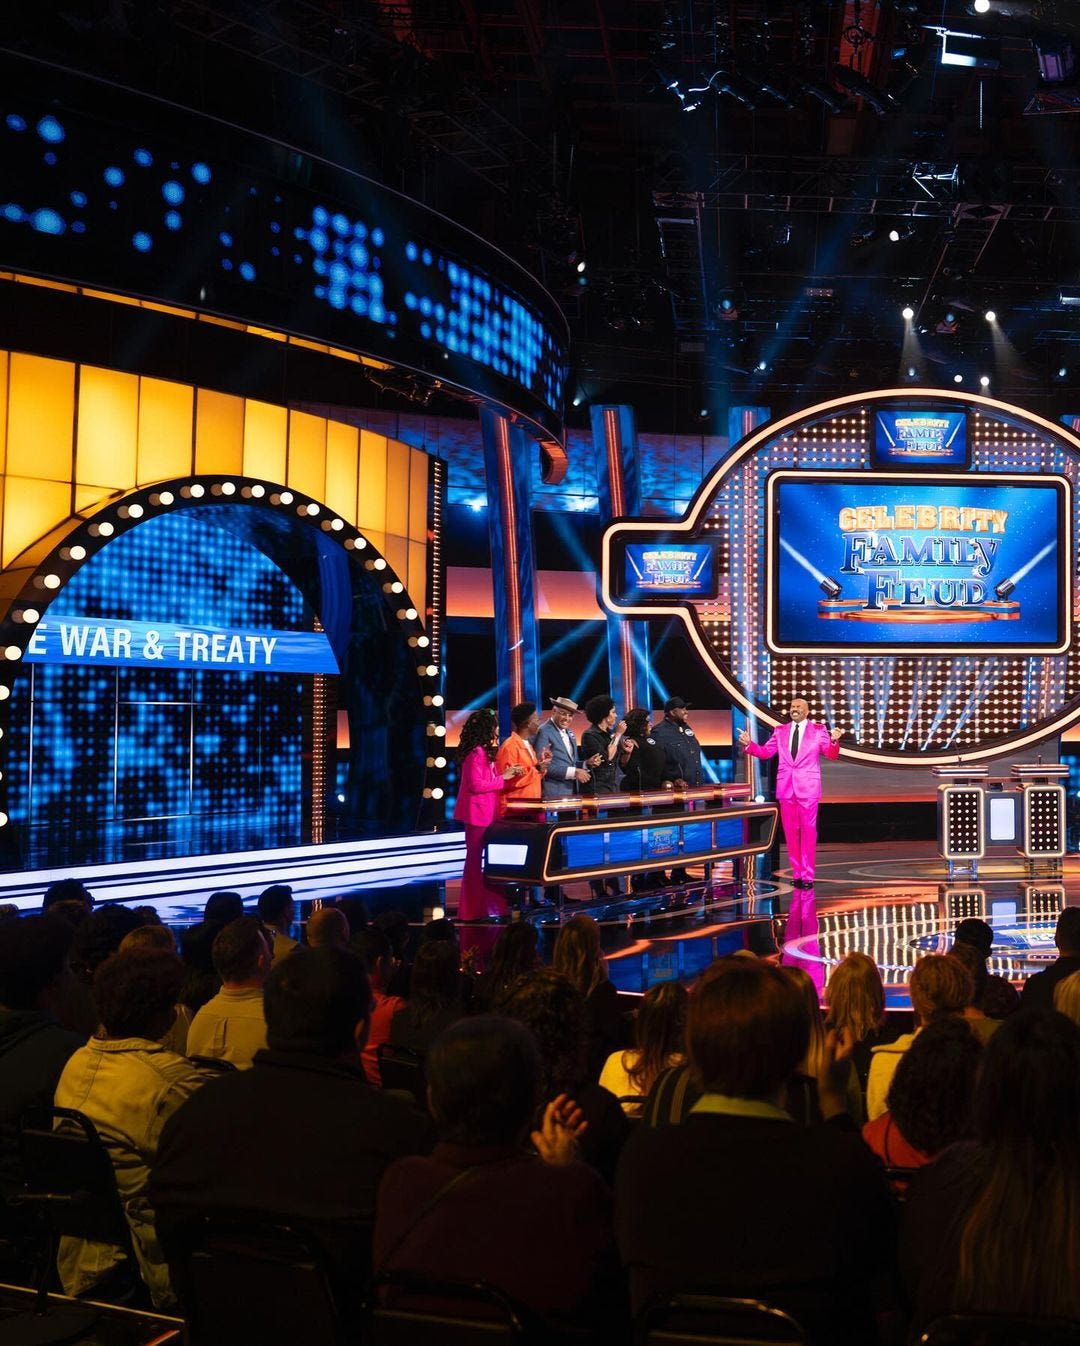 The War and Treaty, Earth, Wind & Fire, more on new episode of 'Celebrity Family Feud'